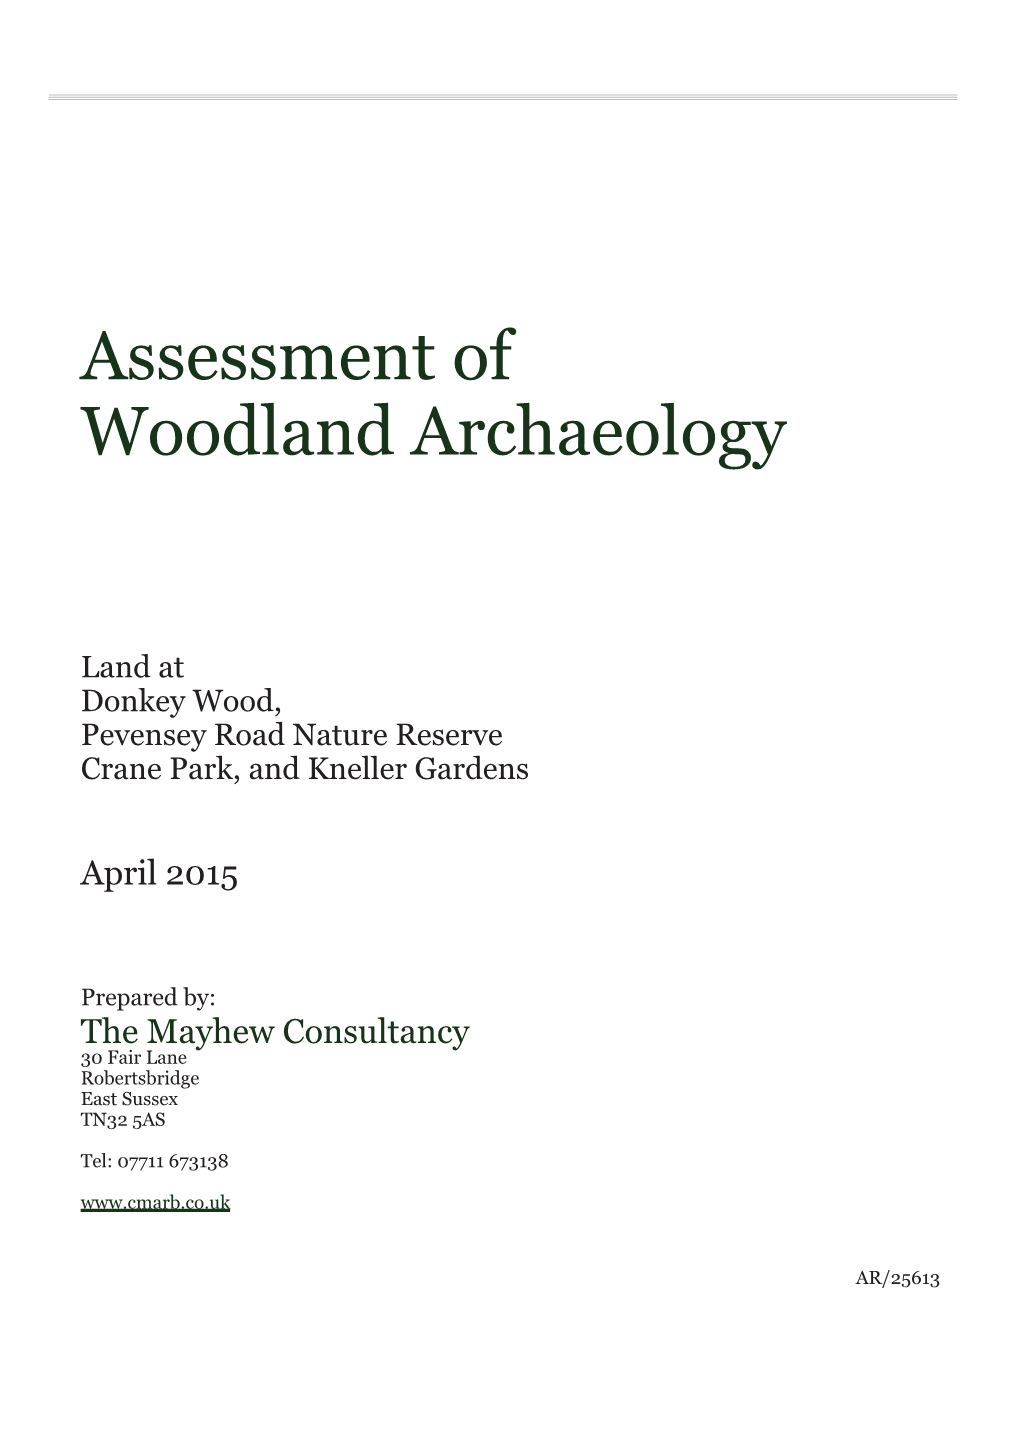 Assessment of Woodland Archaeology